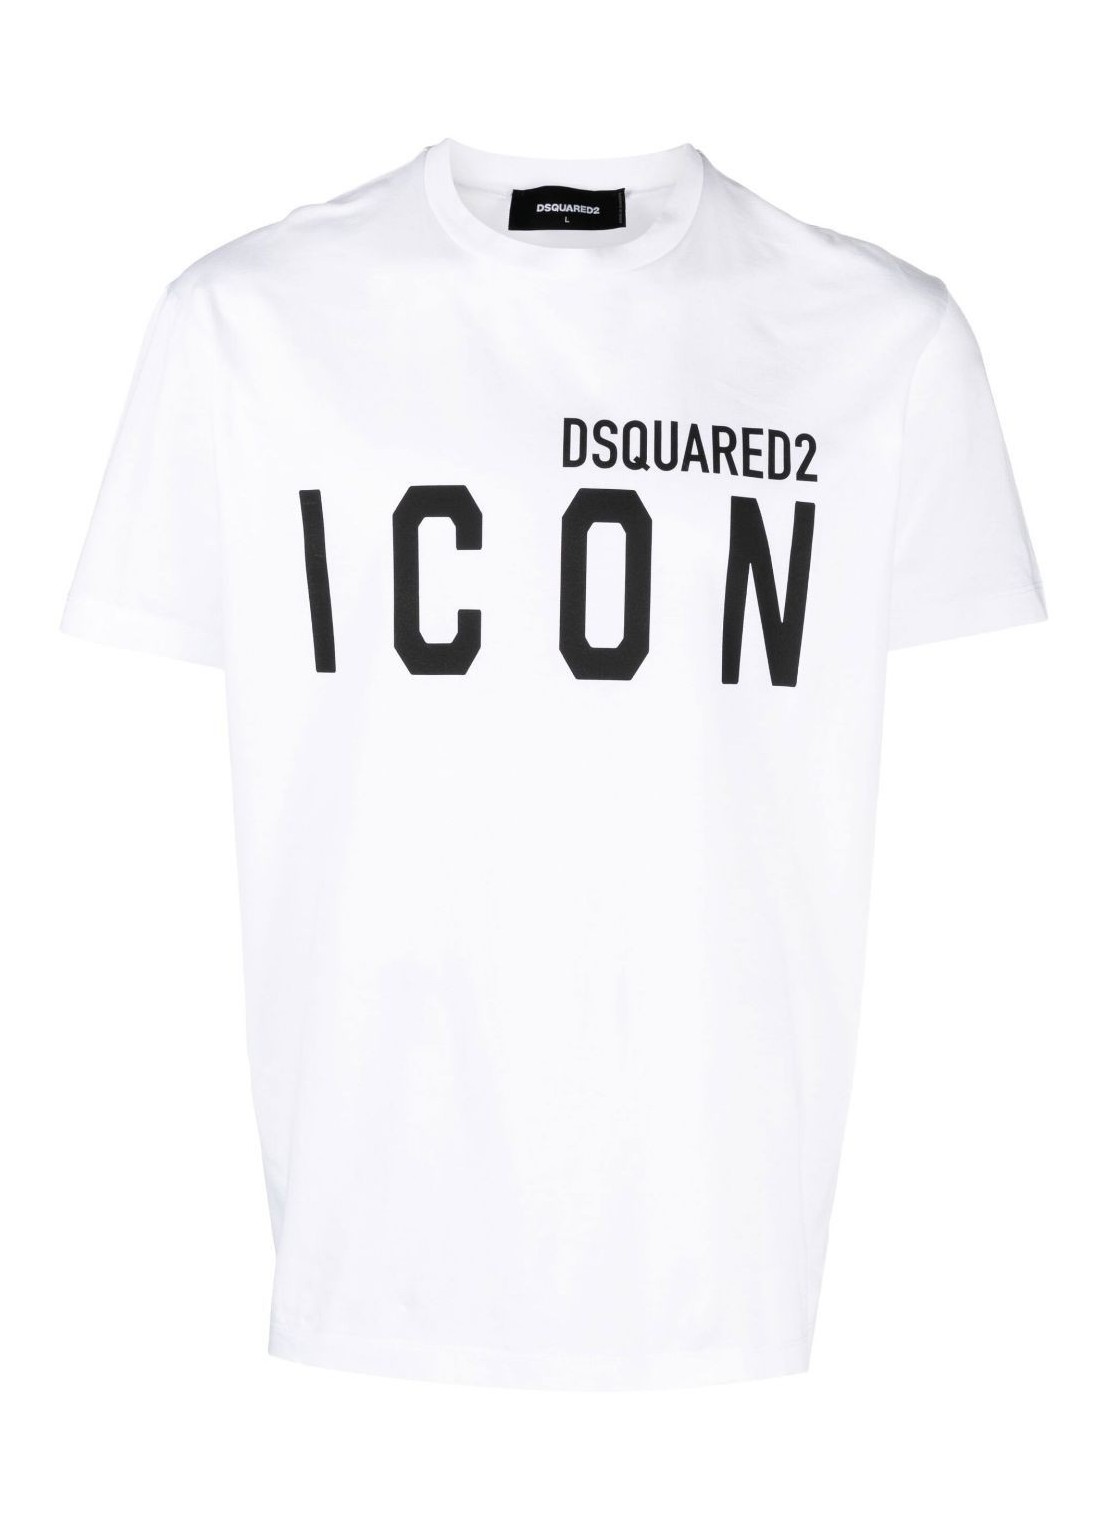 Camiseta dsquared t-shirt man cool fit s79gc0003s23009 989 talla S
 